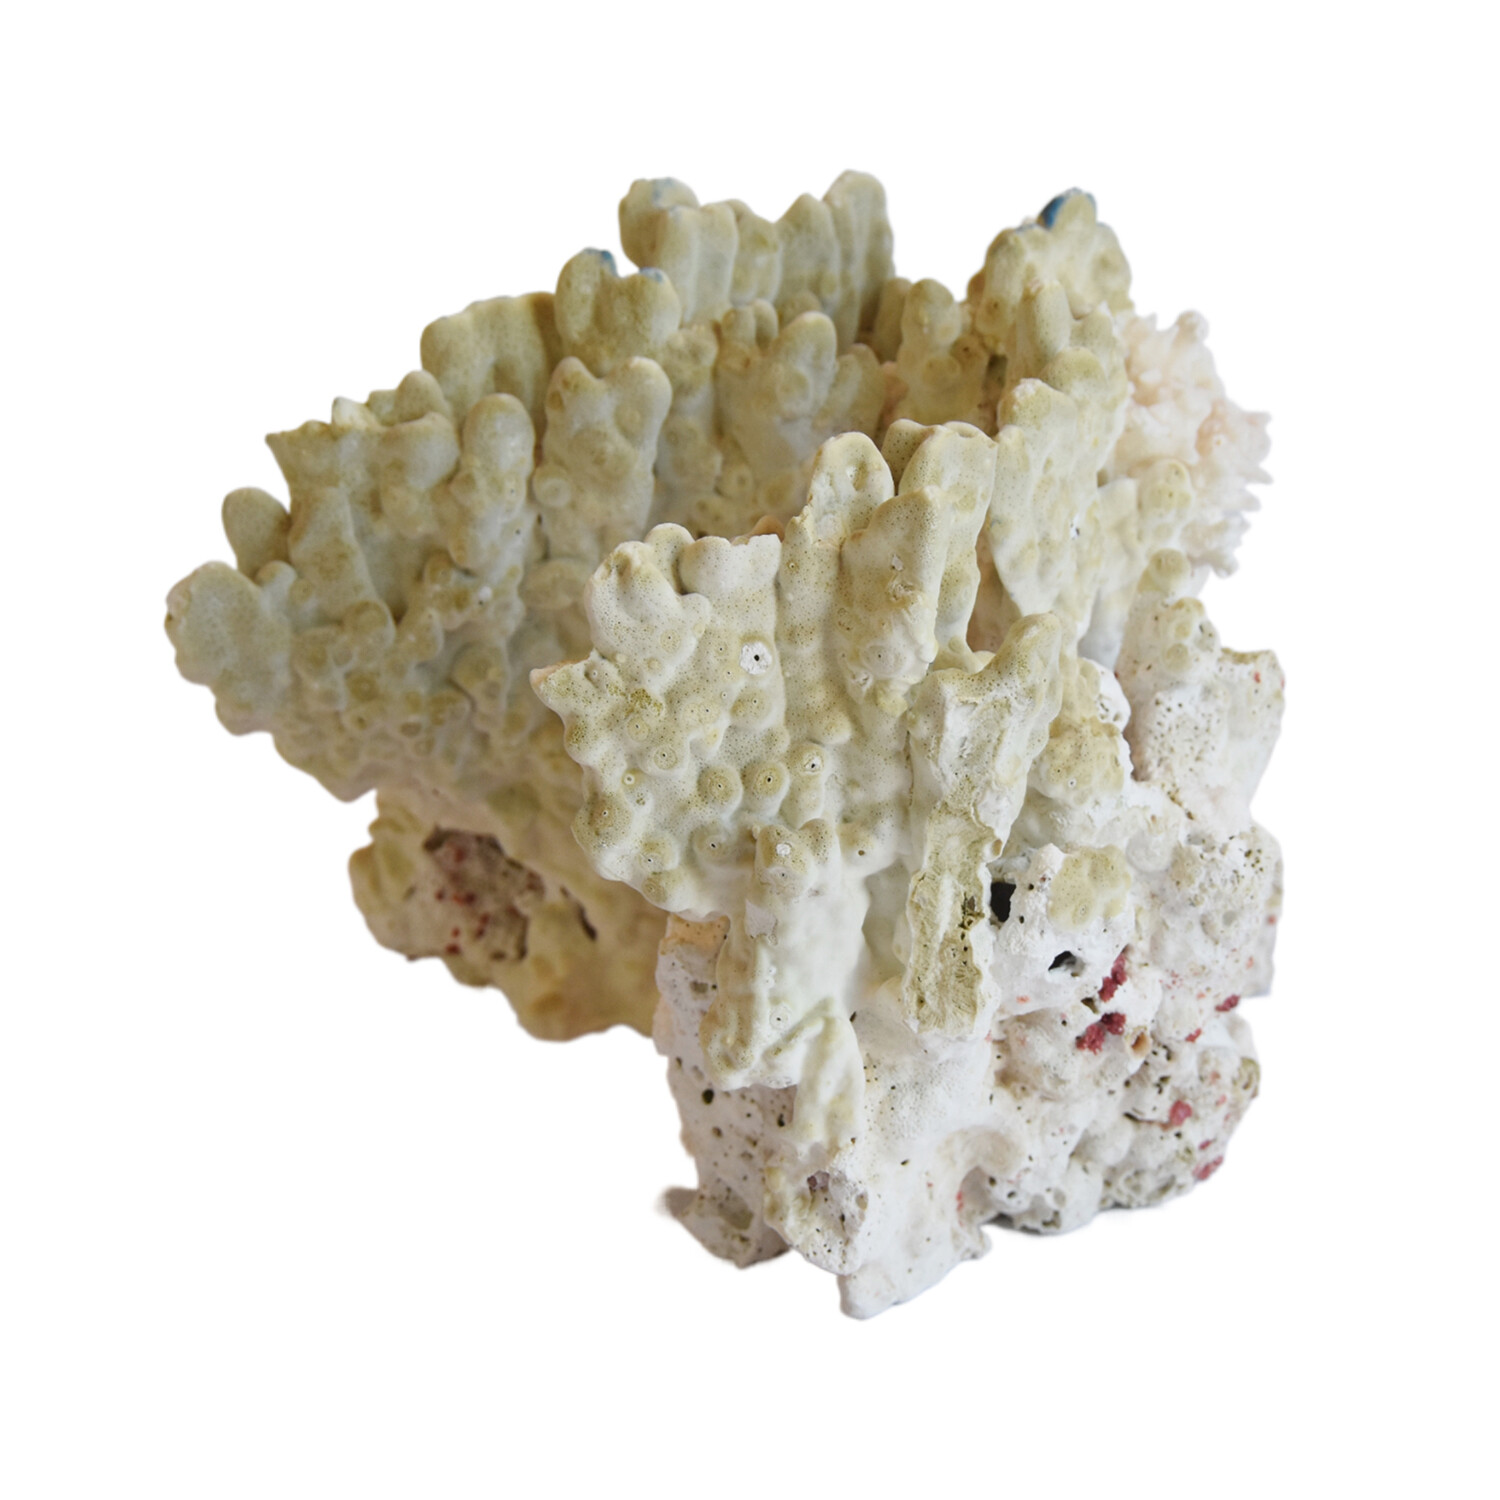 Nautical Natural Green Coral Specimen - Prized Pig by Mike Seratt